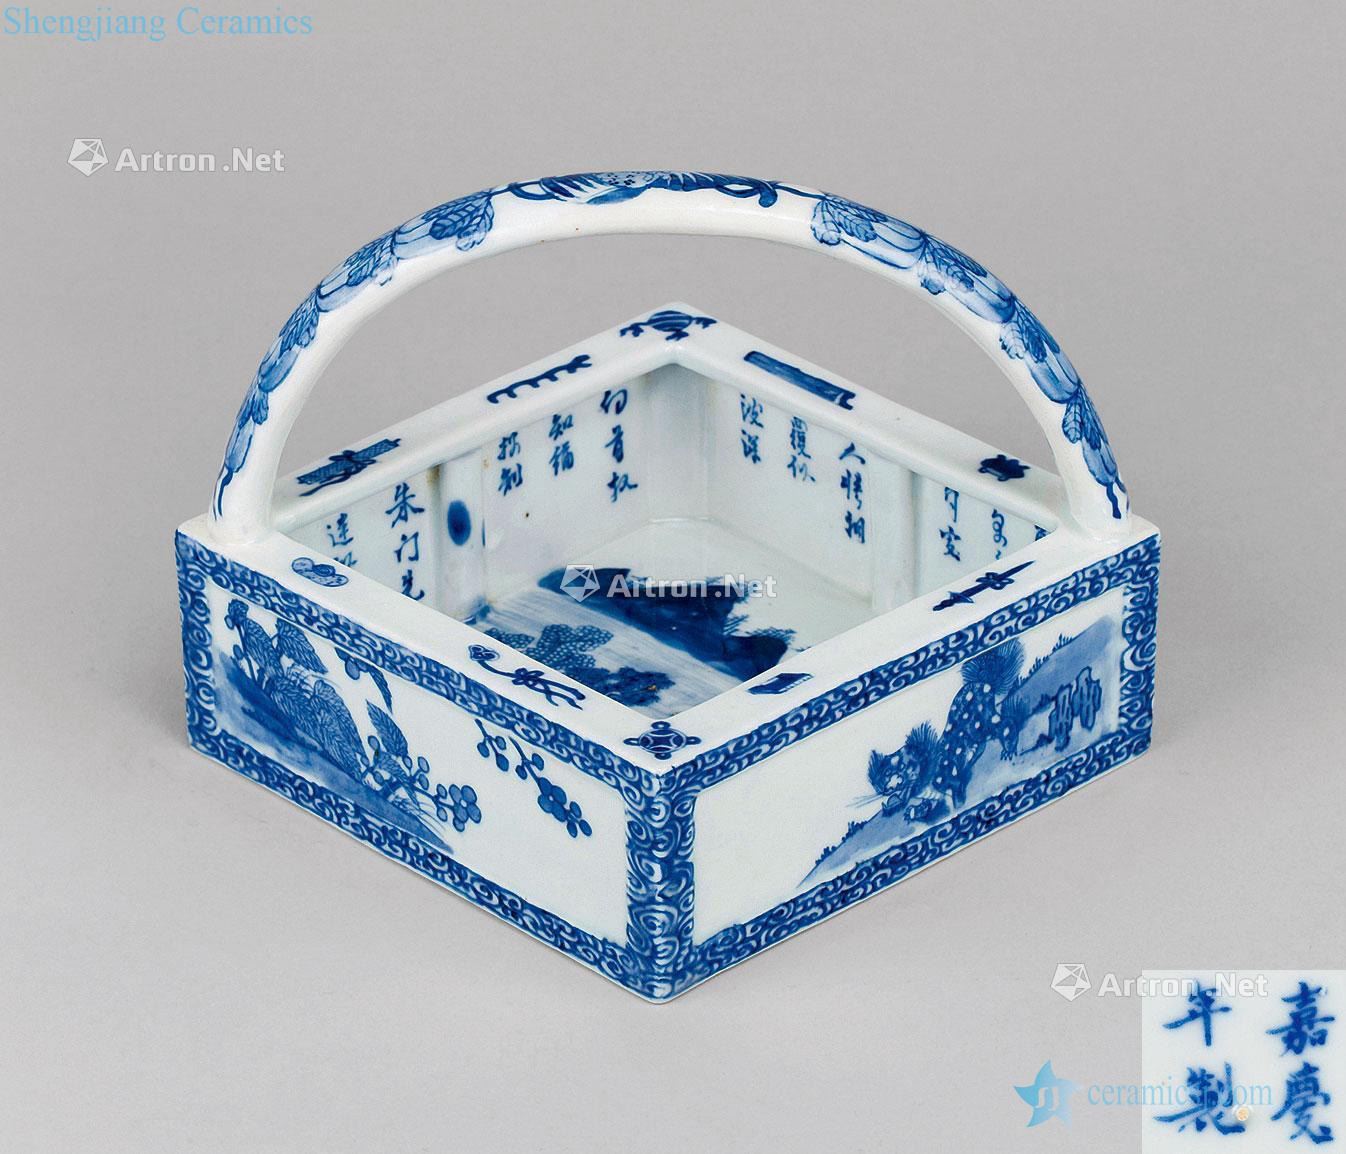 In the qing dynasty (1644-1911) blue and white landscape pattern girder bowl